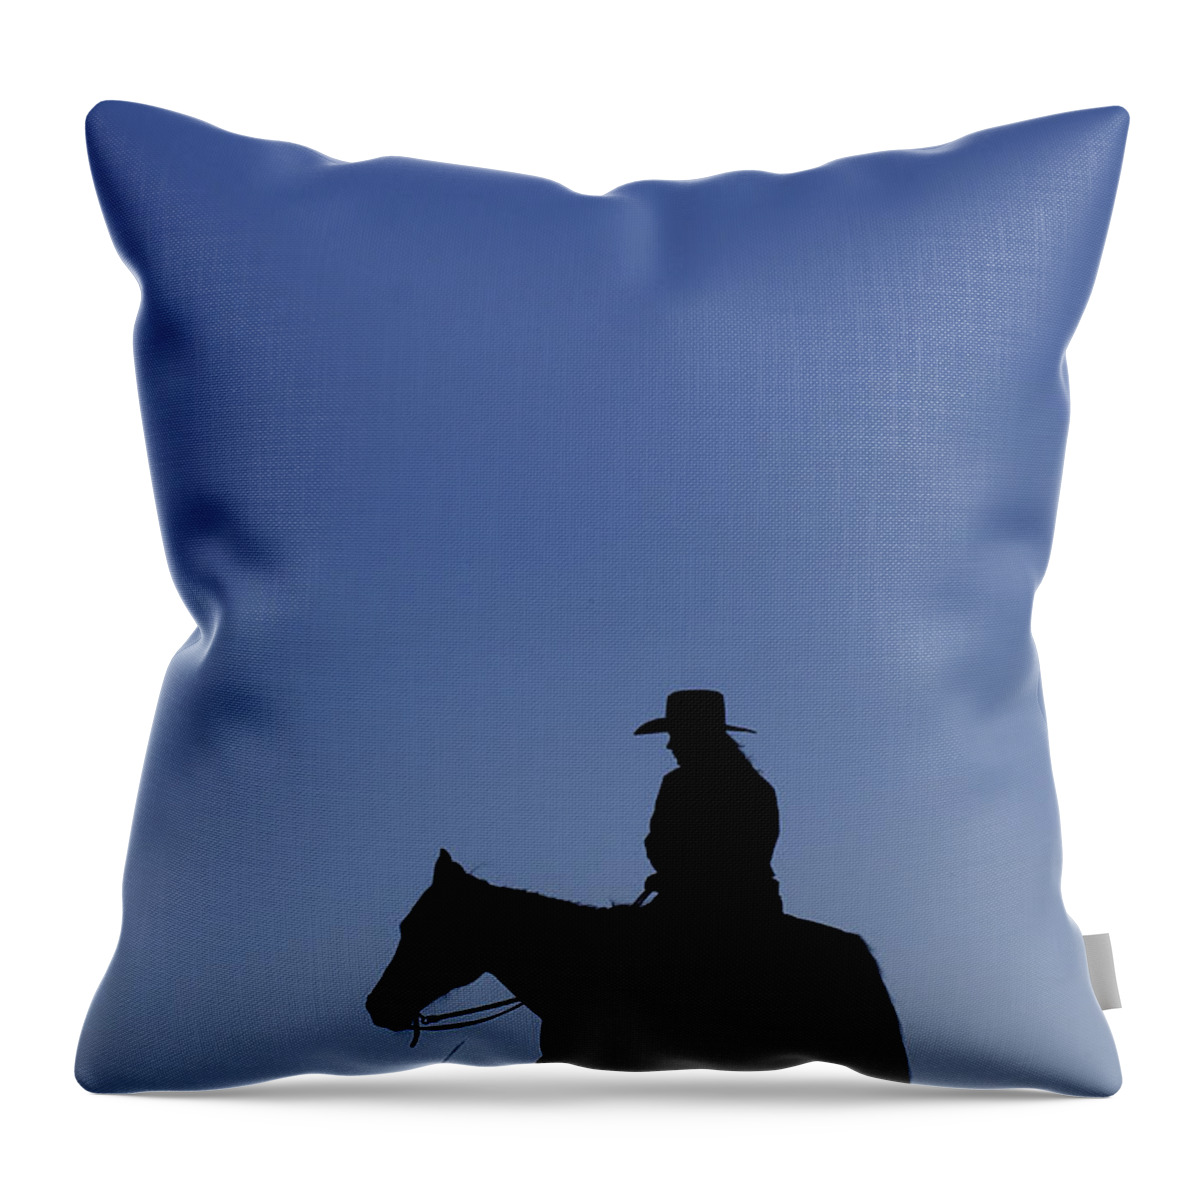 Cowboy Throw Pillow featuring the photograph Cowboy Silhouette by John Shaw